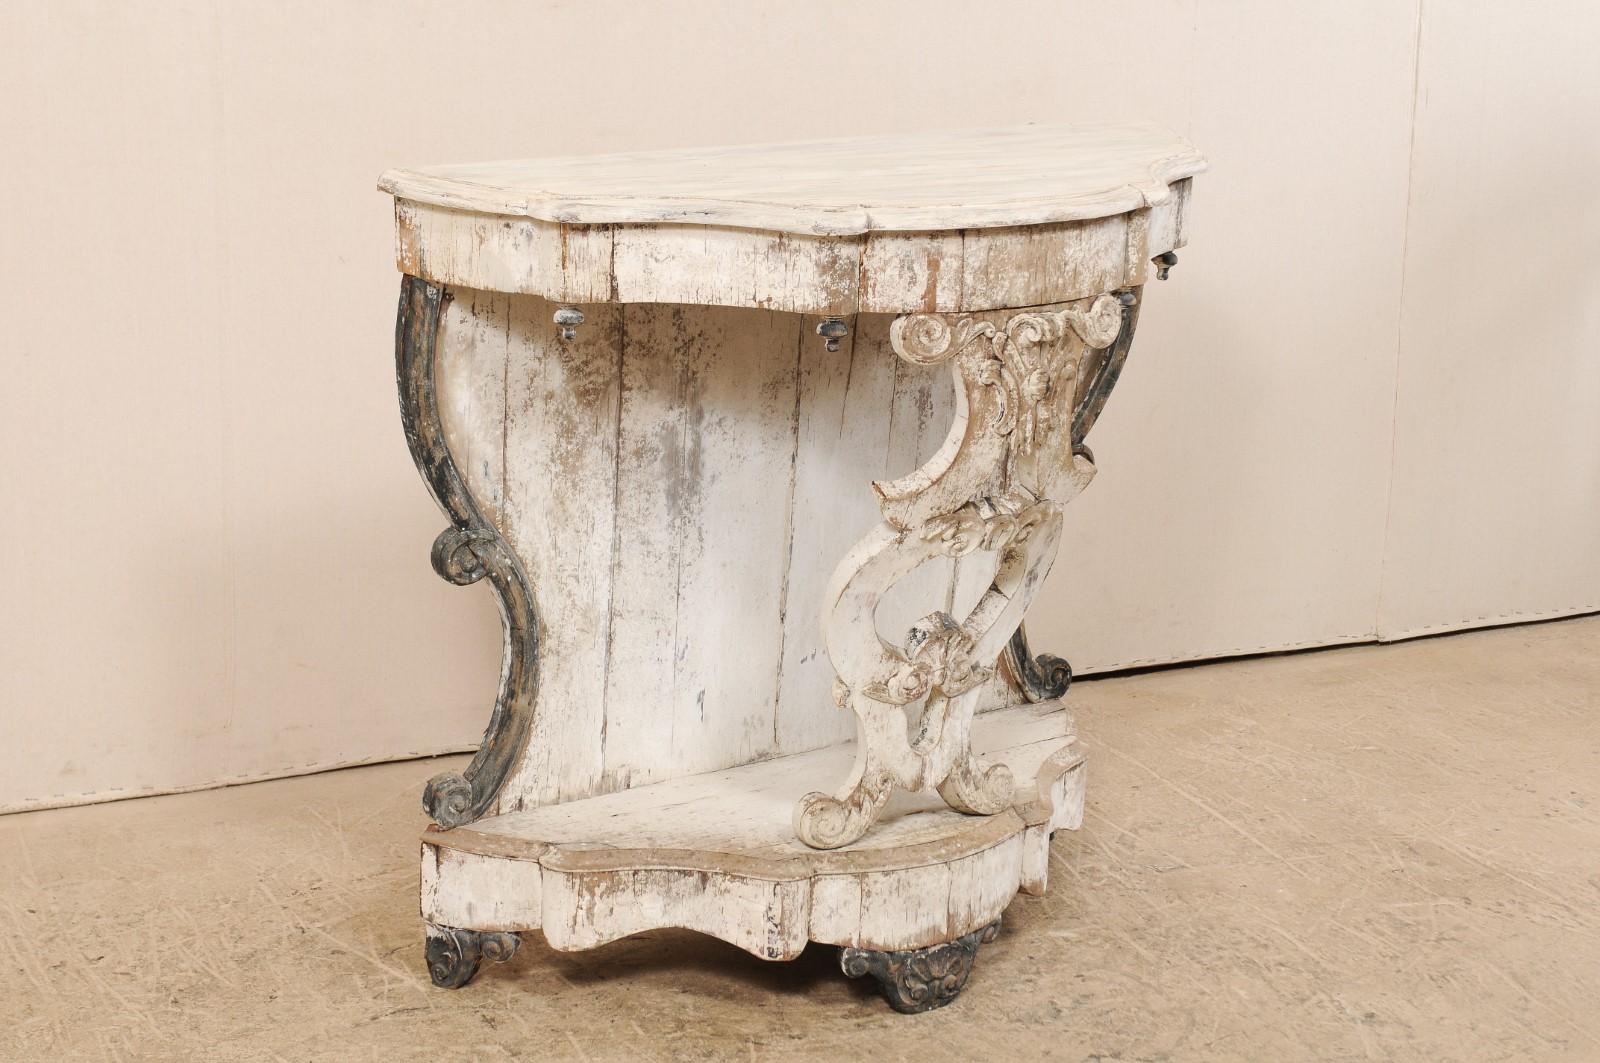 An Italian 19th century carved wood Rococo style console table. This gorgeous Italian half-moon shaped wall console table features a beautifully scalloped edge top above a lower bottom base which mimics the same scalloped design about the skirt. The